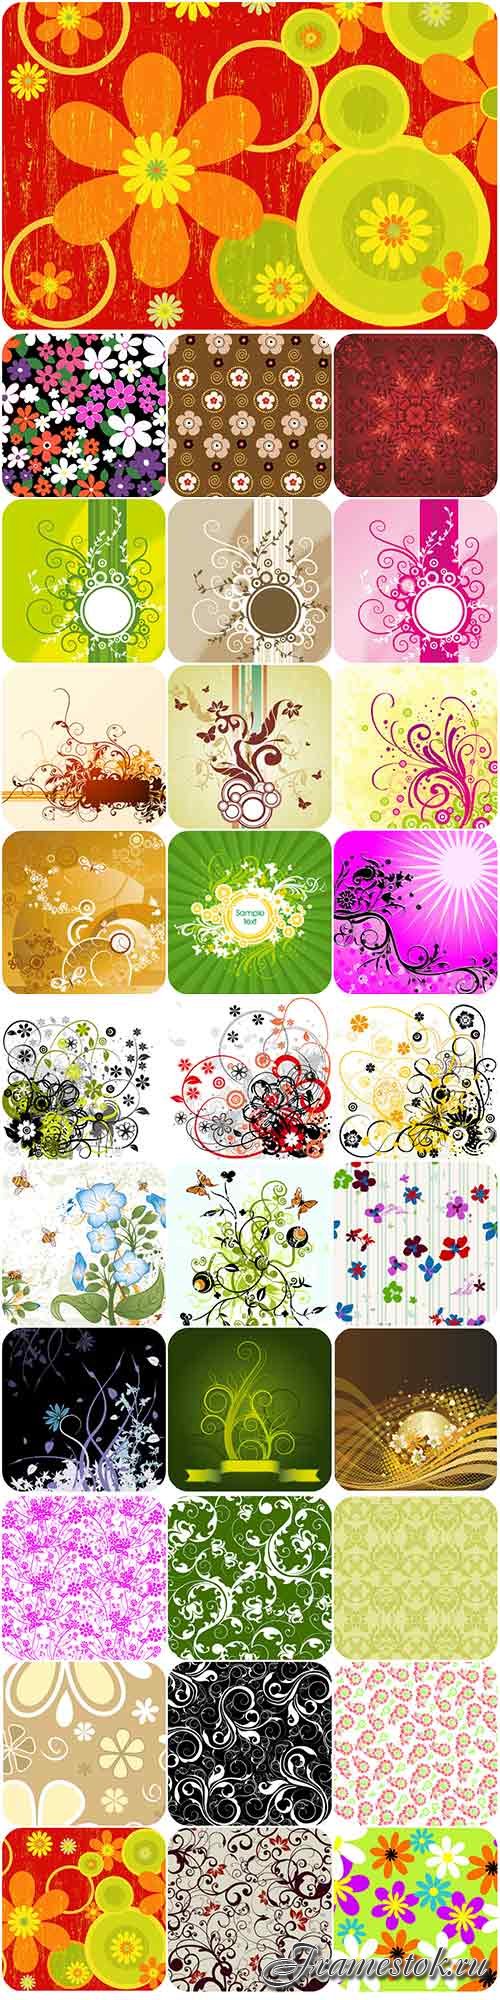 Floral patterns backgrounds stock vector - 4